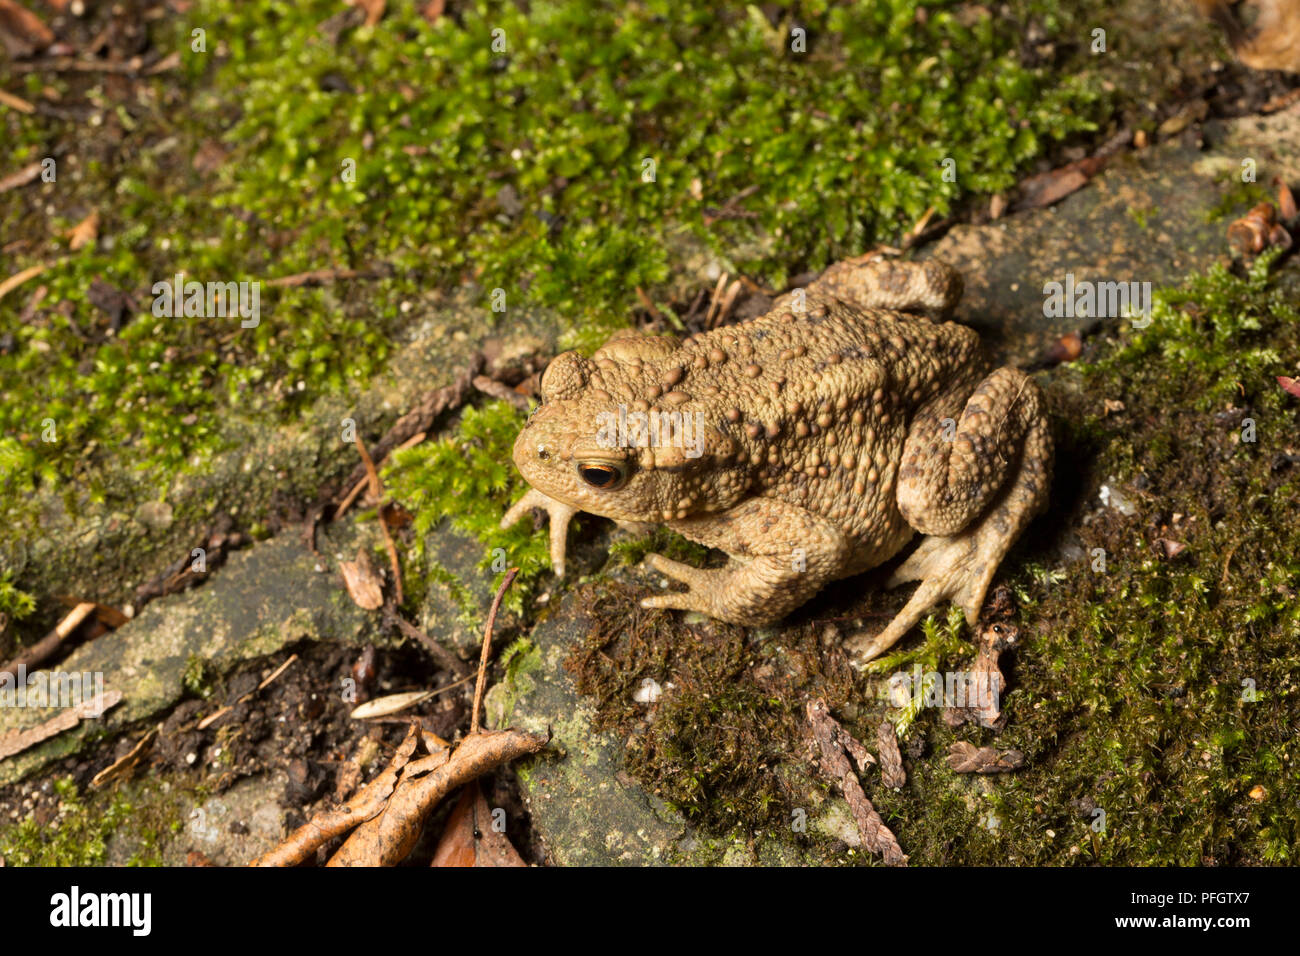 A common or european toad, Bufo bufo, photographed at night in a garden in Lancashire North West England UK GB Stock Photo